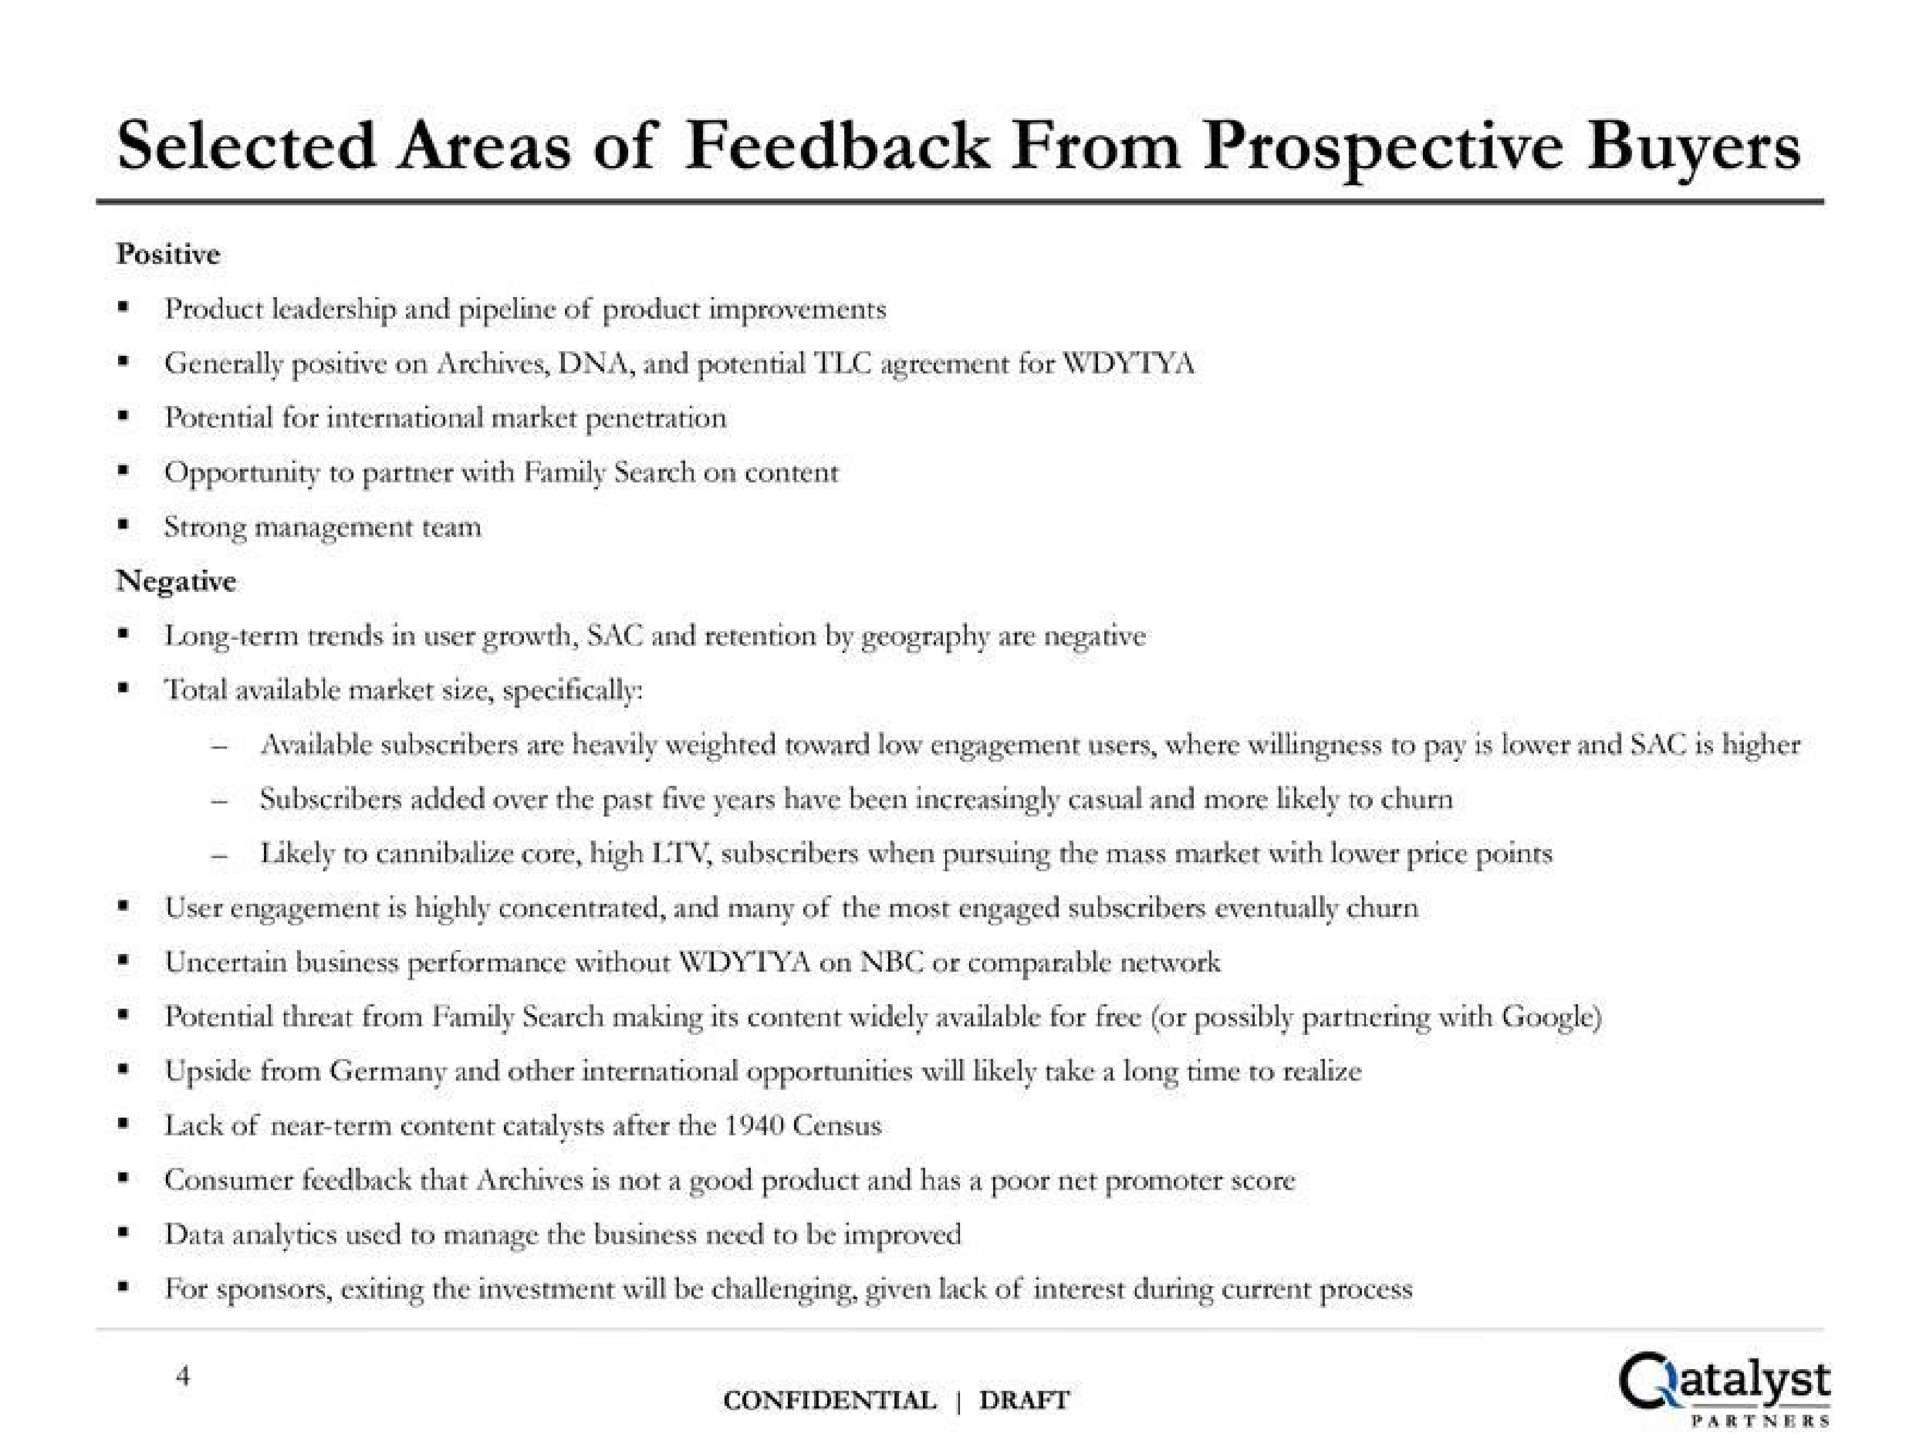 selected areas of feedback from prospective buyers | Qatalyst Partners